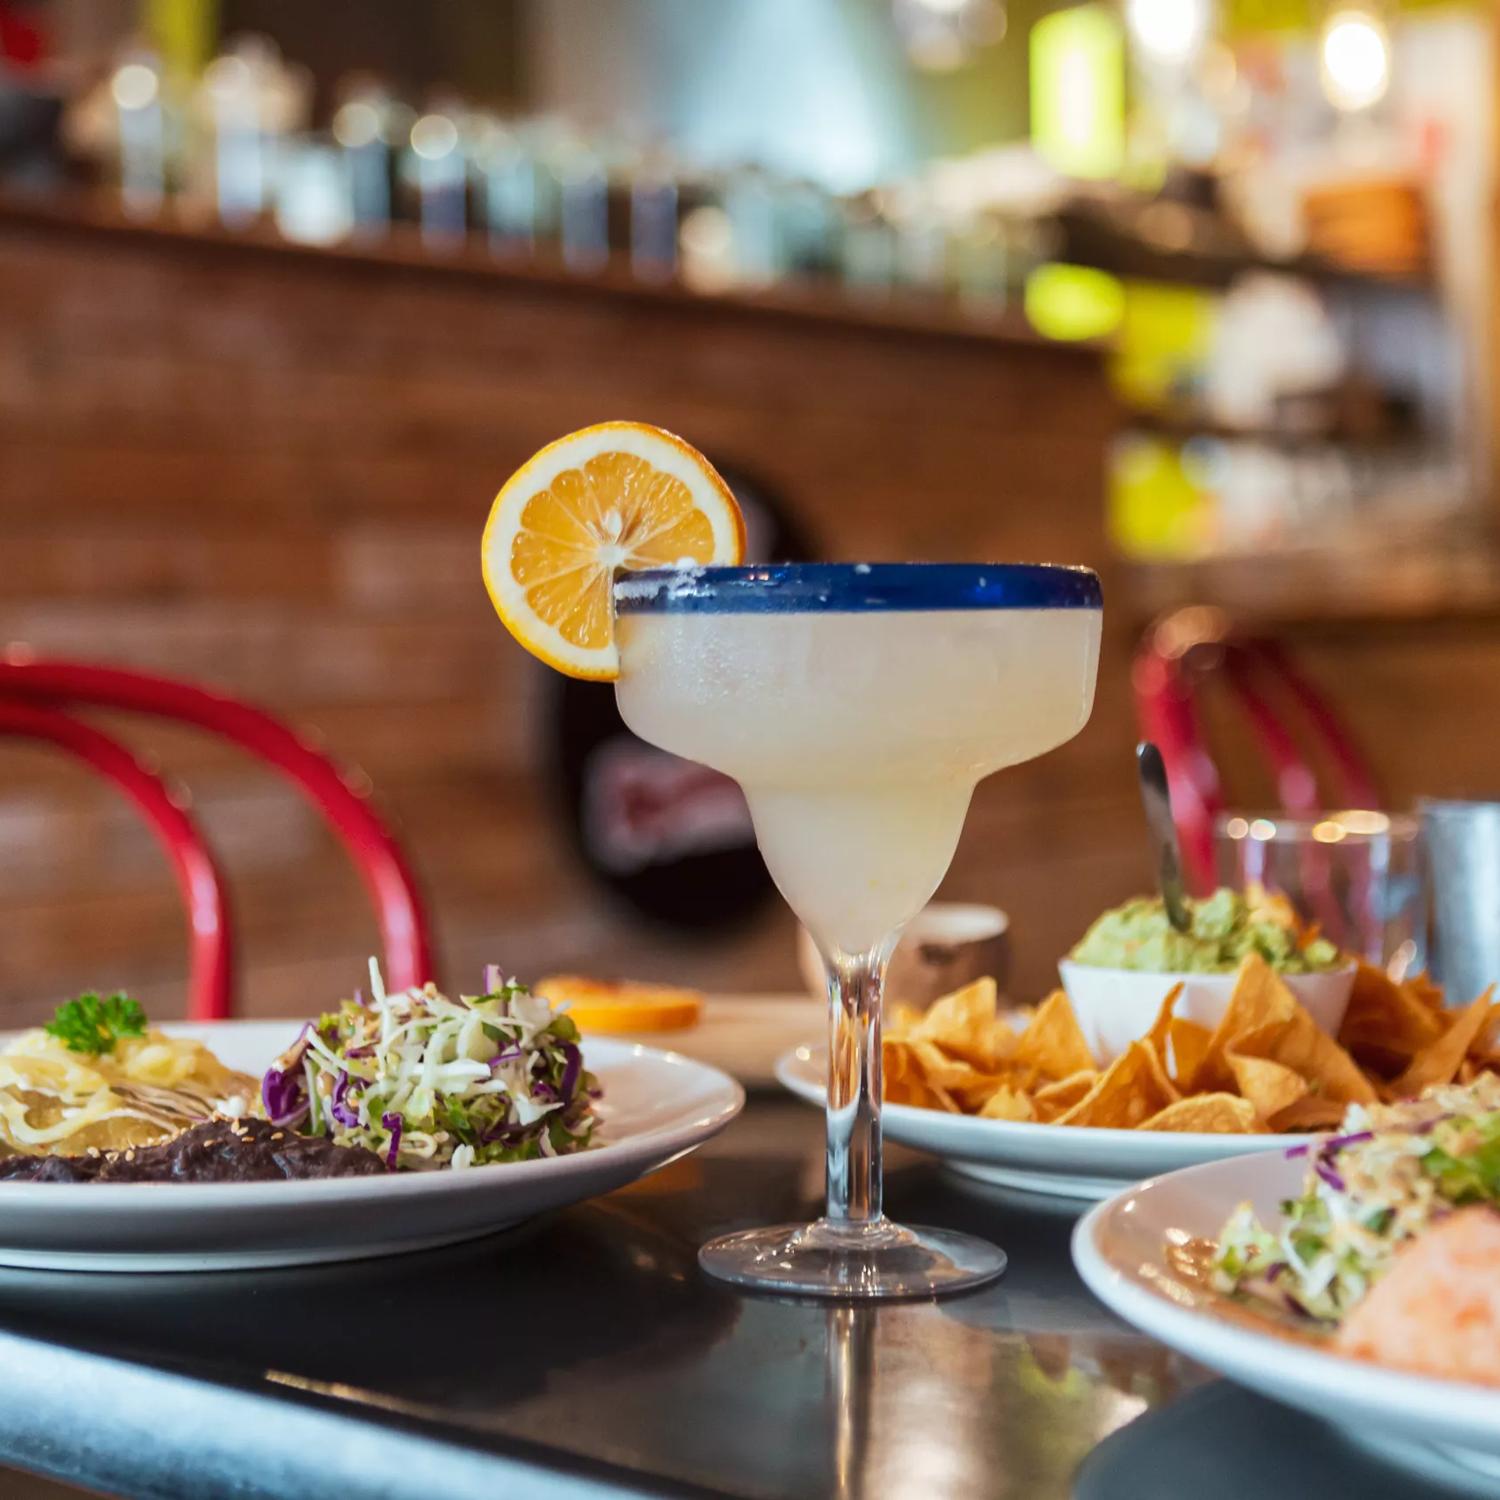  A frozen lime margarita and three Mexican dishes are on a table at Viva Mexico, a restaurant on Jackson Street in Petone, Lower Hutt, Wellington.